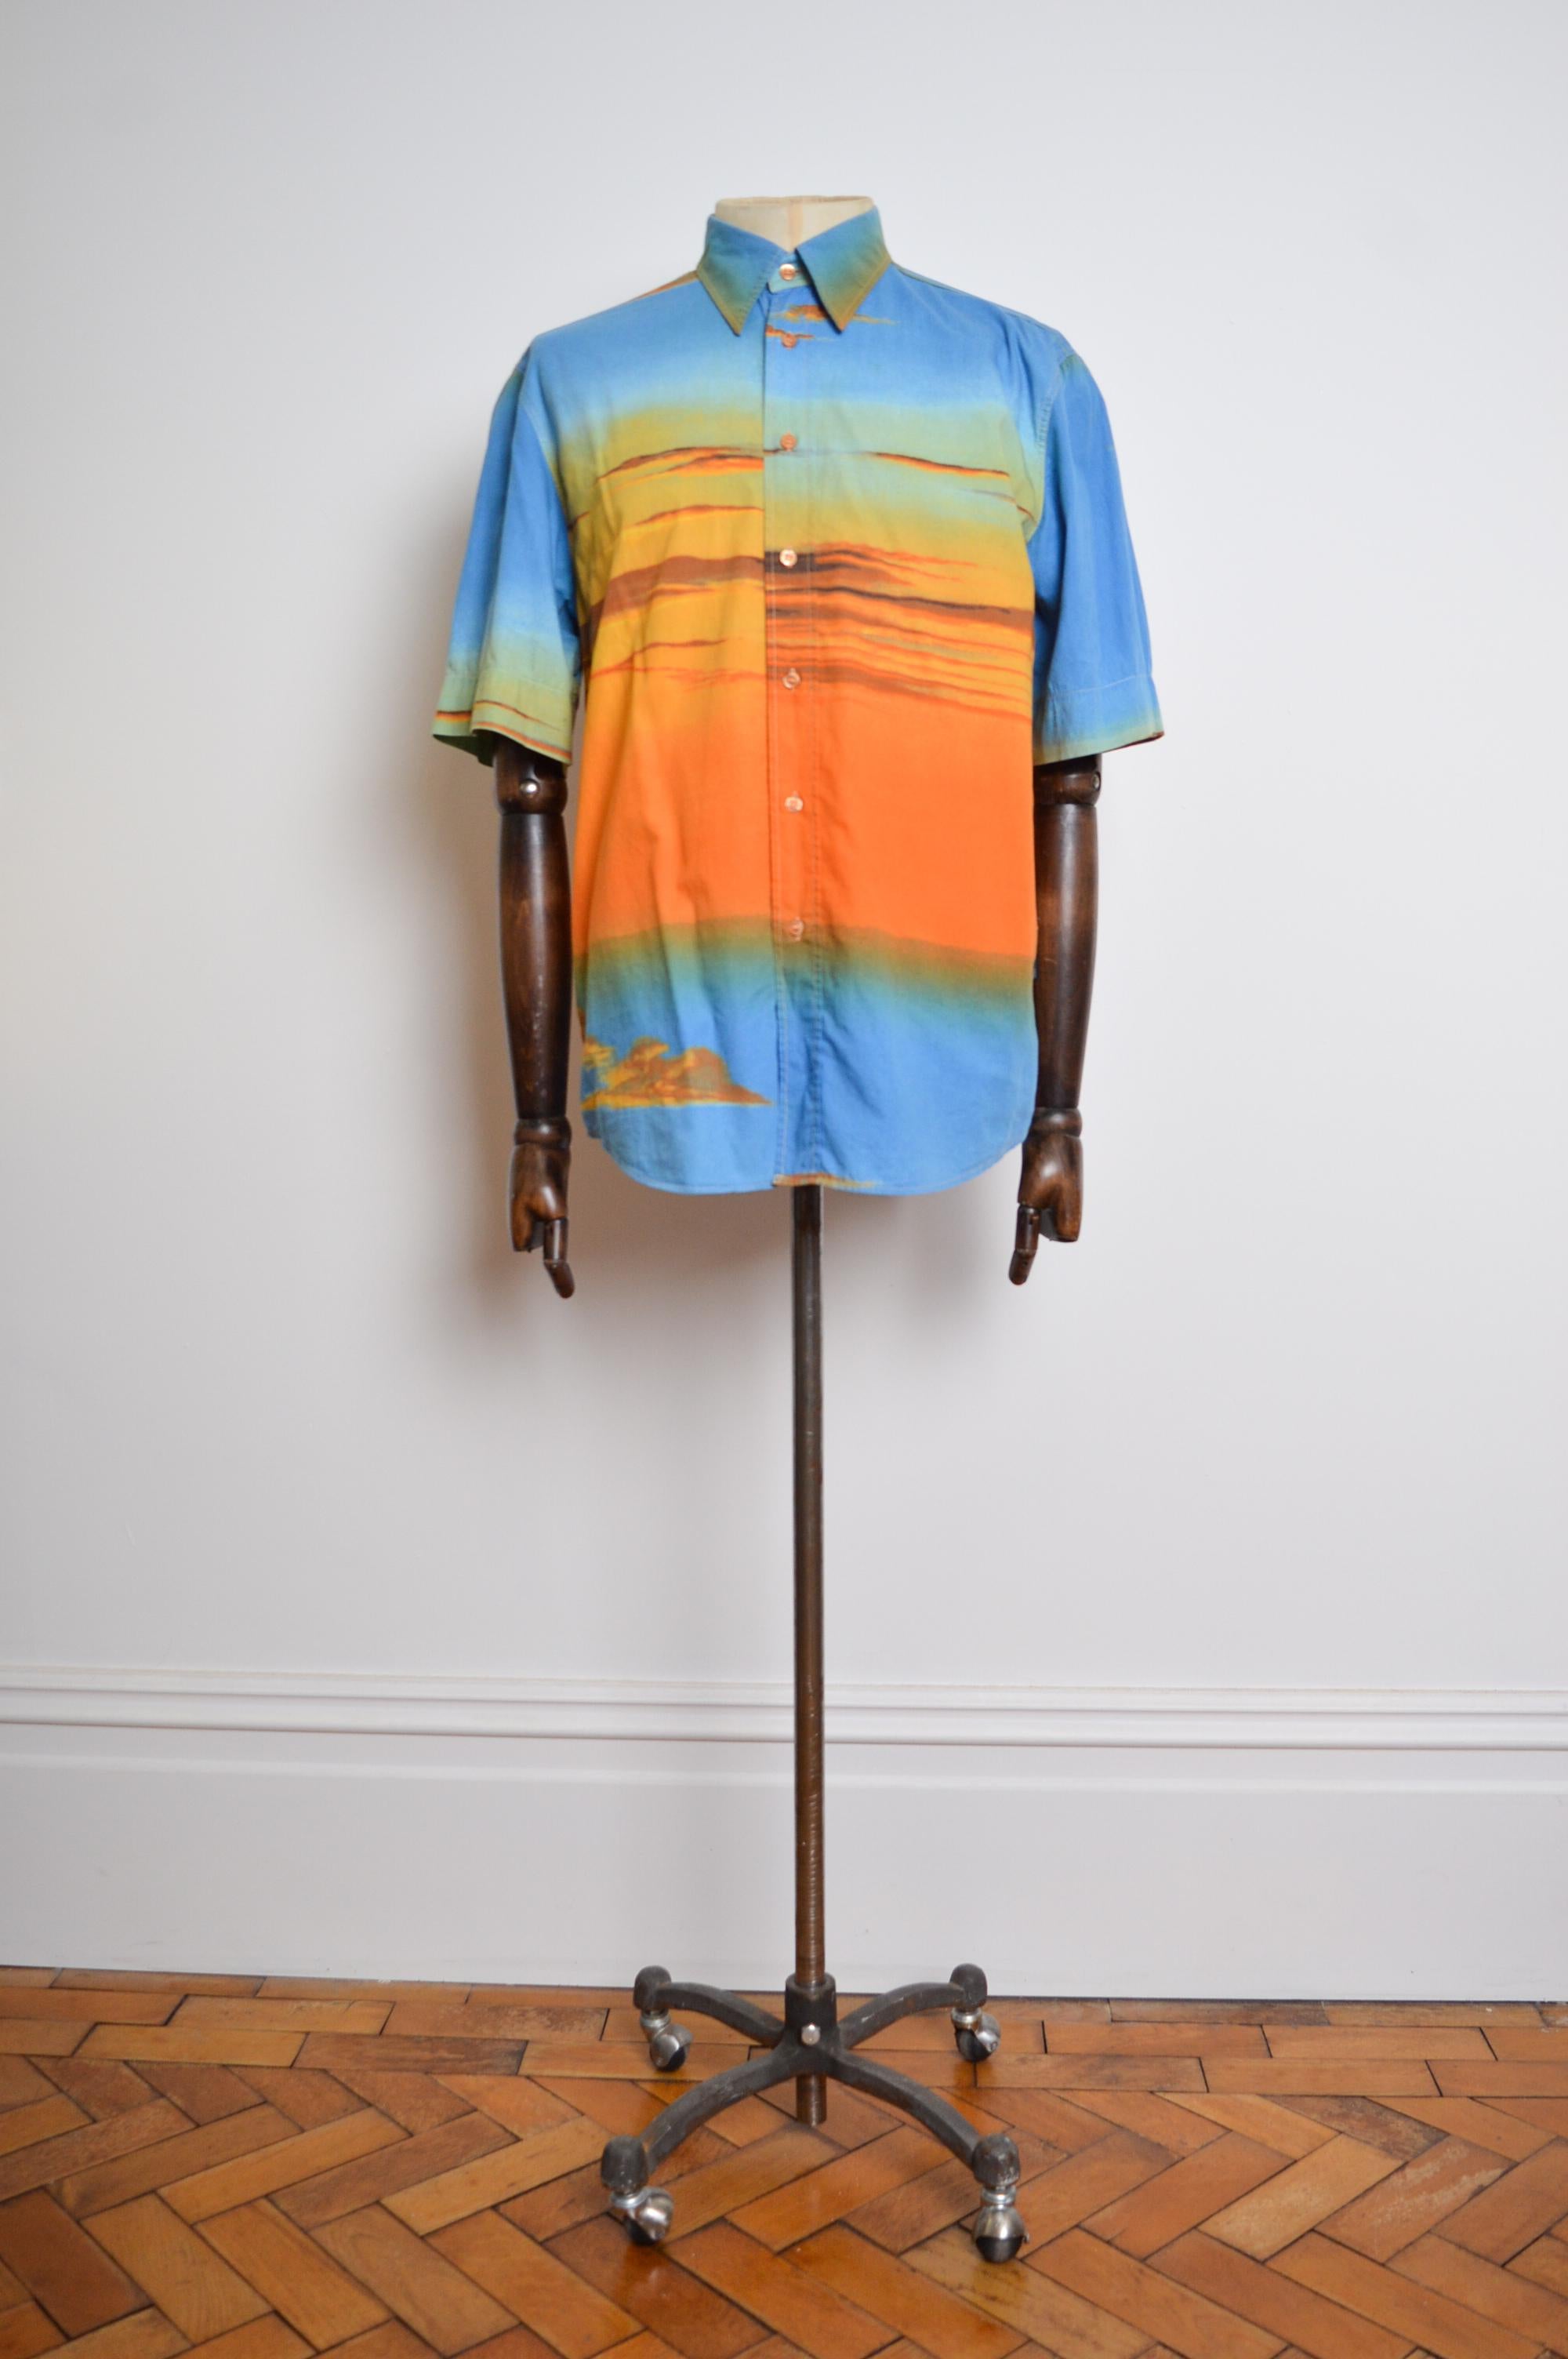 Early 2000's UK Garage Era 'MOSCHINO' Sun-set print Cotton Shirt, crafted from a Printed Cloth in Blue and Orange ombré shades. 

We also have the Matching Jacket & Pants available to Purchase separately. 

MADE IN ITALY.   

Features: Buttons down